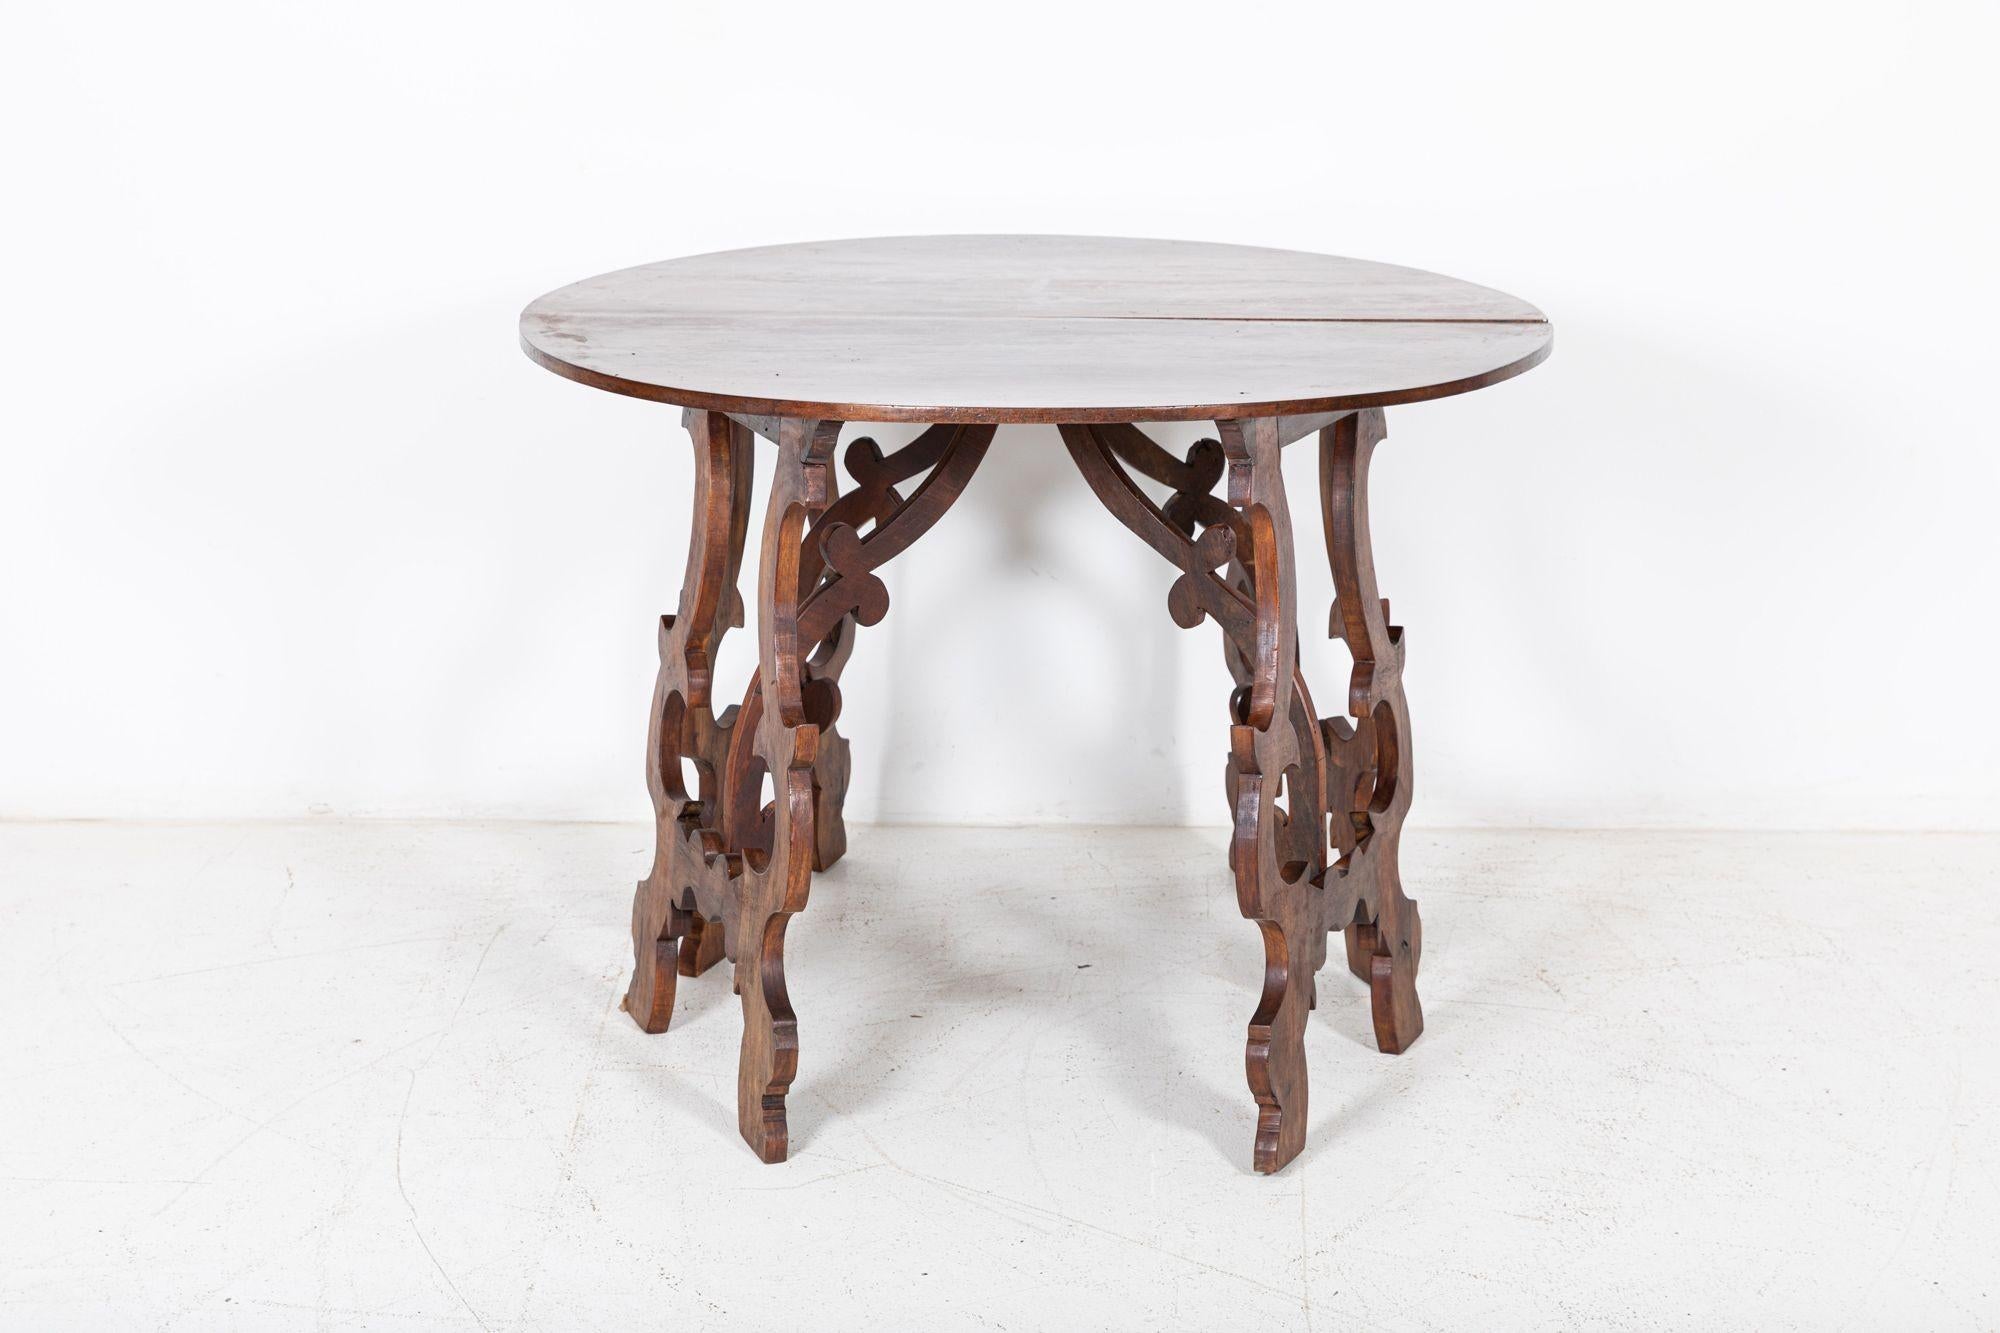 Circa 1750

18thC Provincial Italian Walnut Demi Lune Table

Sourced from Italy

One left

Measures: W116 x D56 x H81 cm.

 